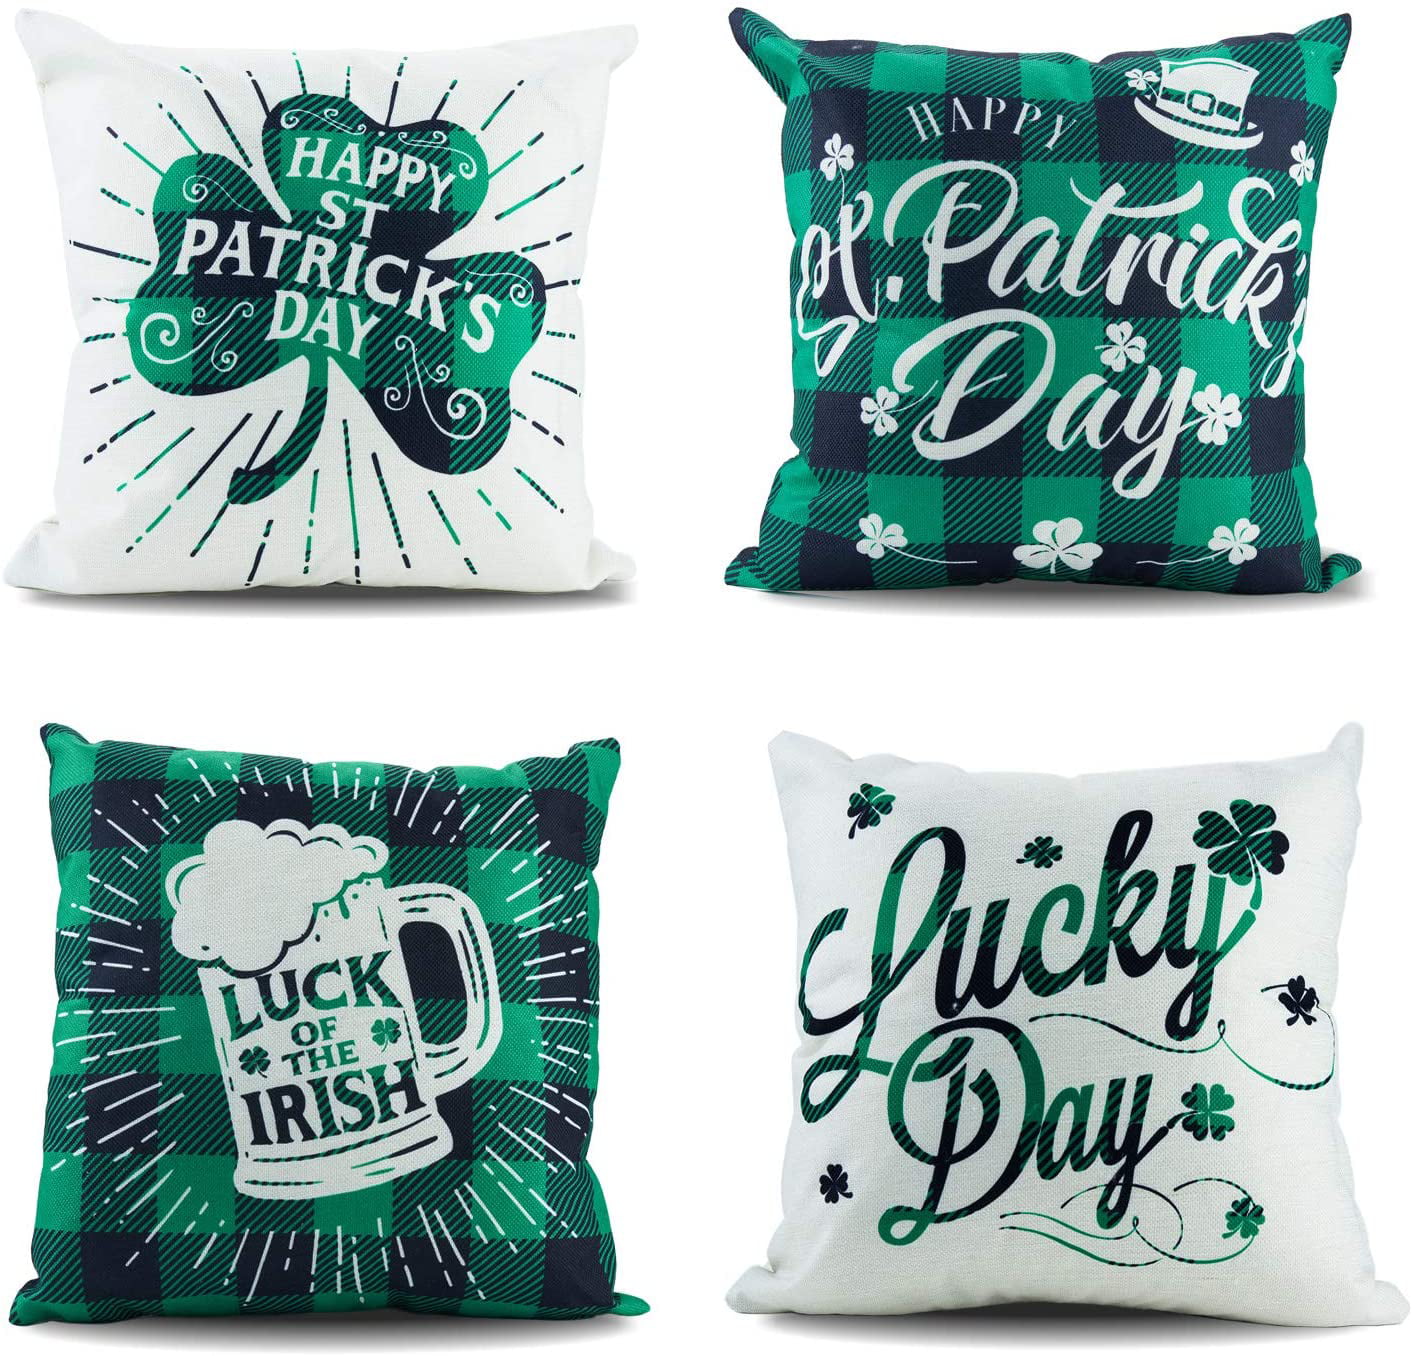 St Patrick's Day Pillow Covers 18 x18 Inch Buffalo Check Throw Pillow Cover 